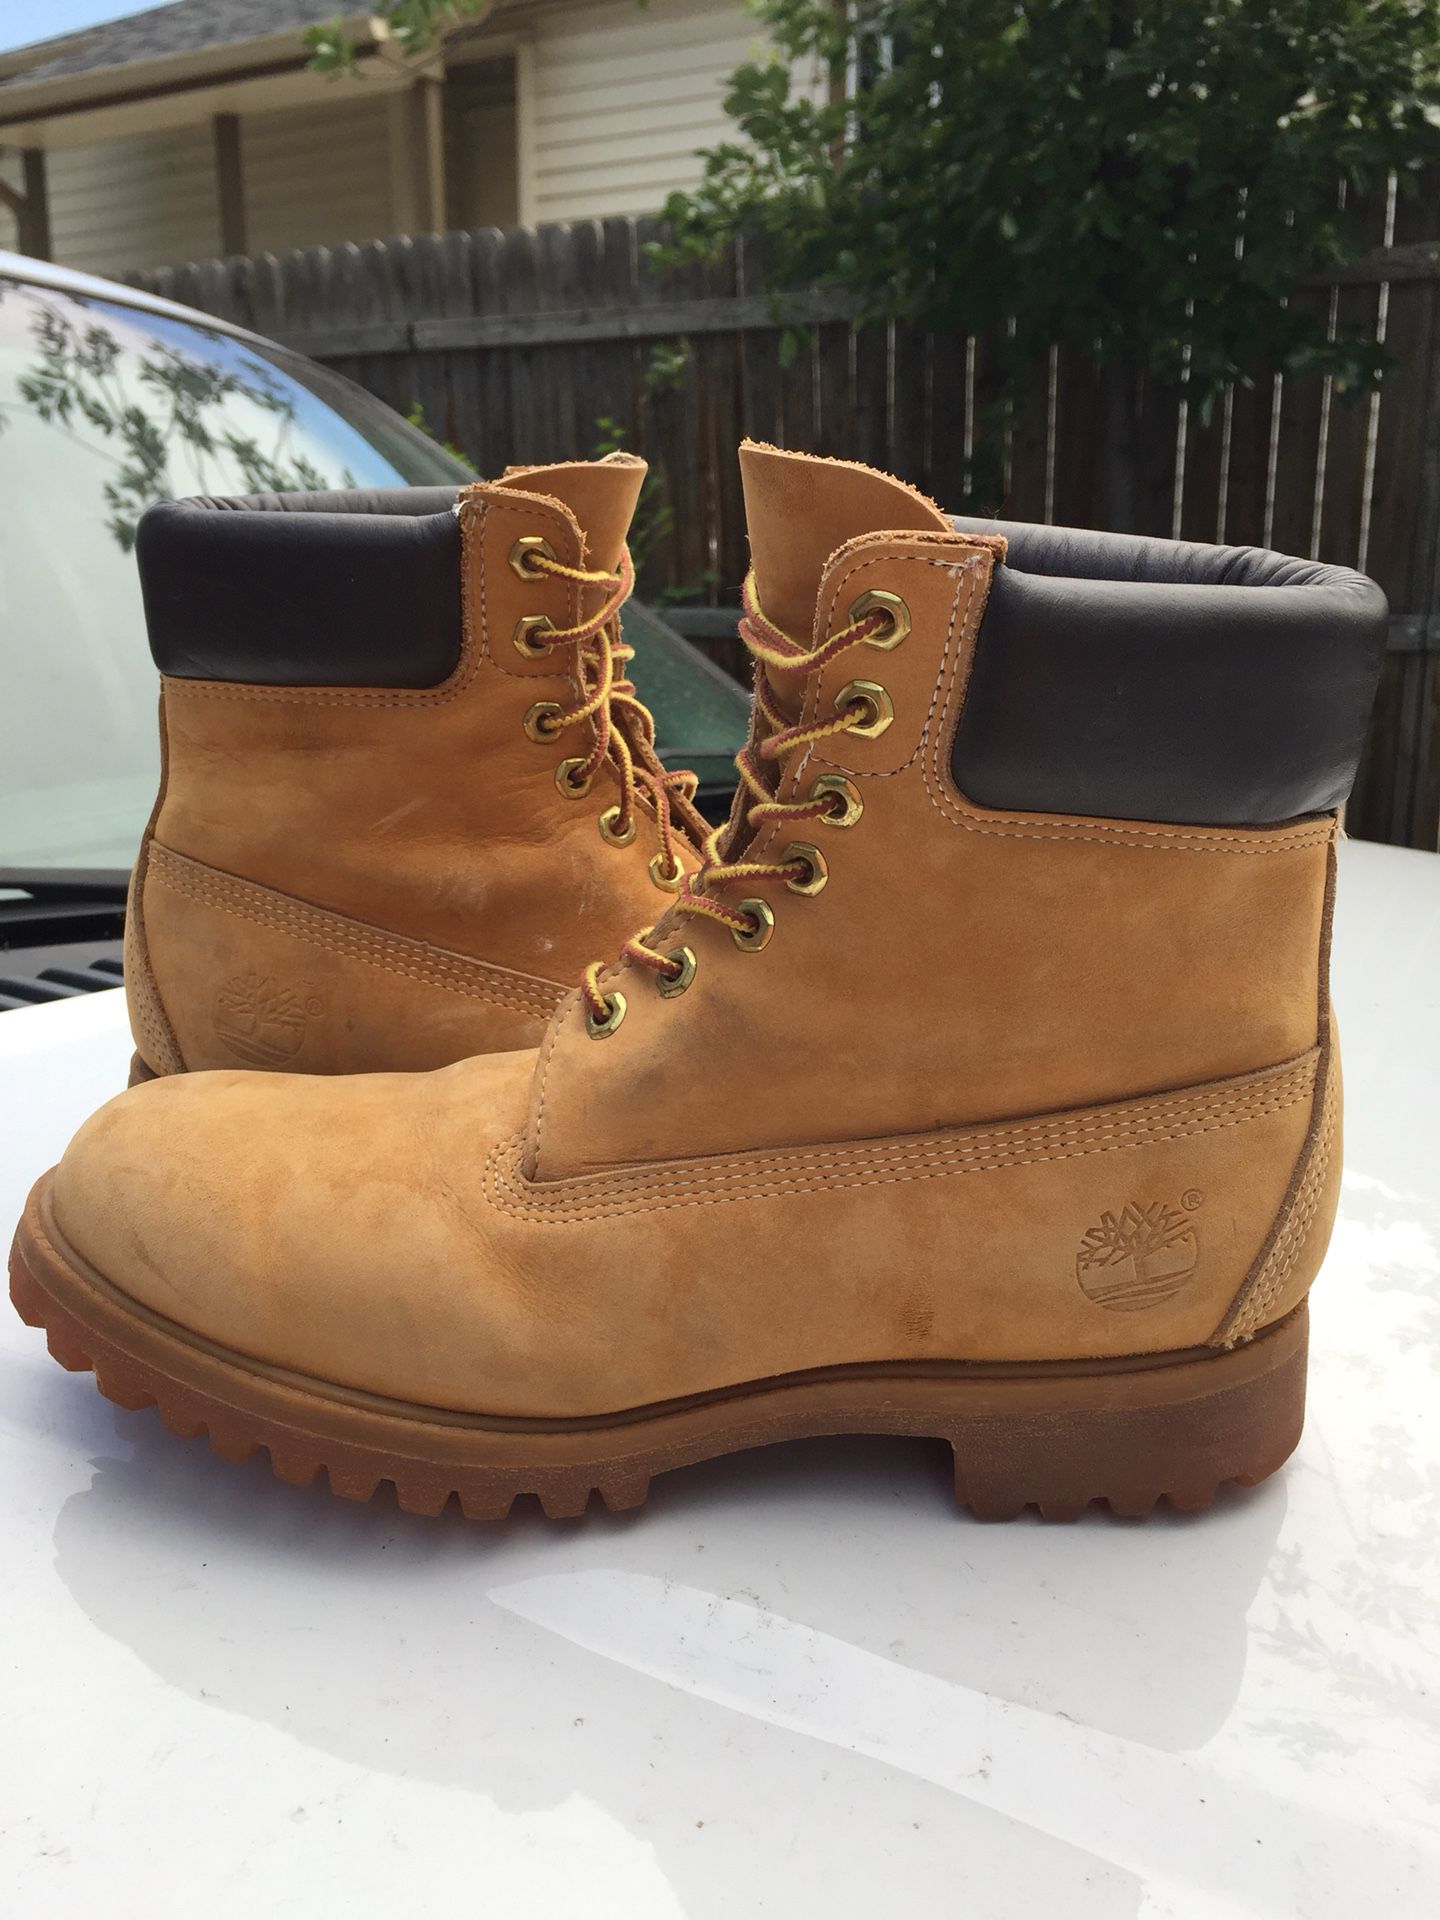 Timberland Men’s Boots Size 9.5